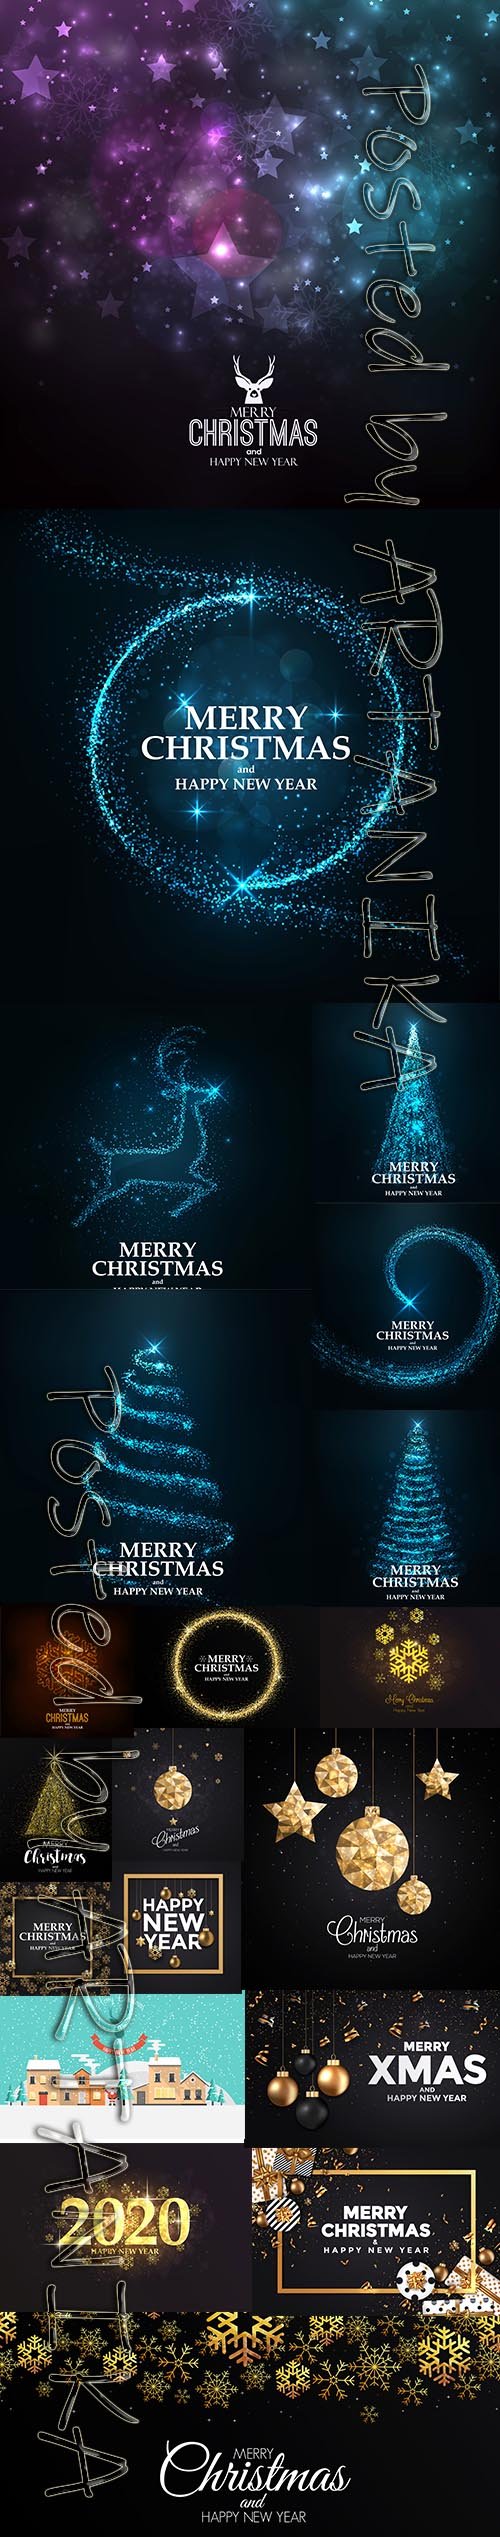 Merry Christmas and New Year 2020 Vector Illustrations Pack Vol 16